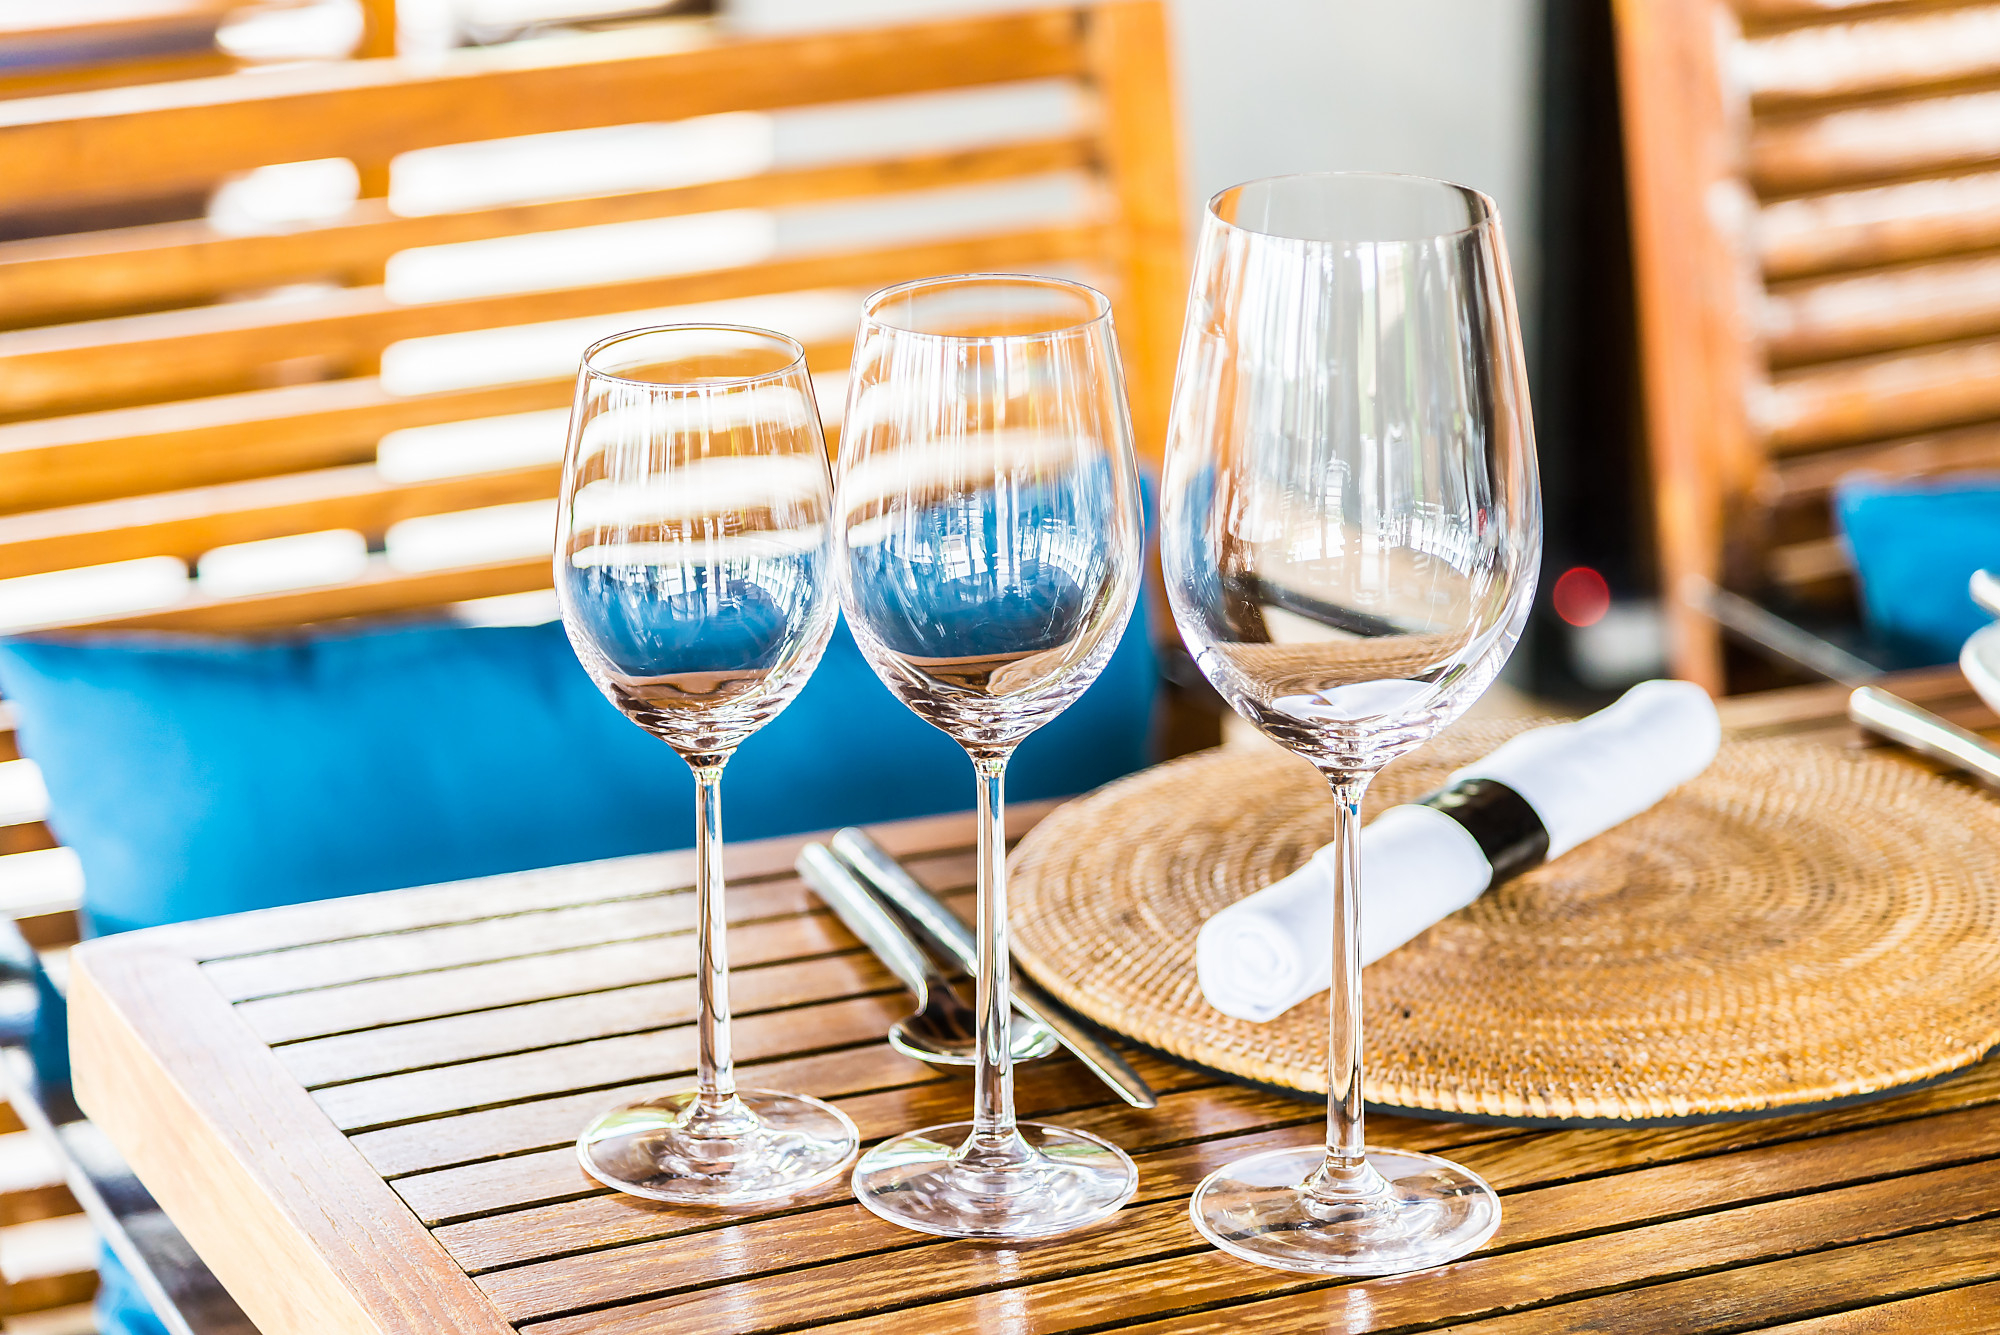 wine-and-water-glasses-on-table